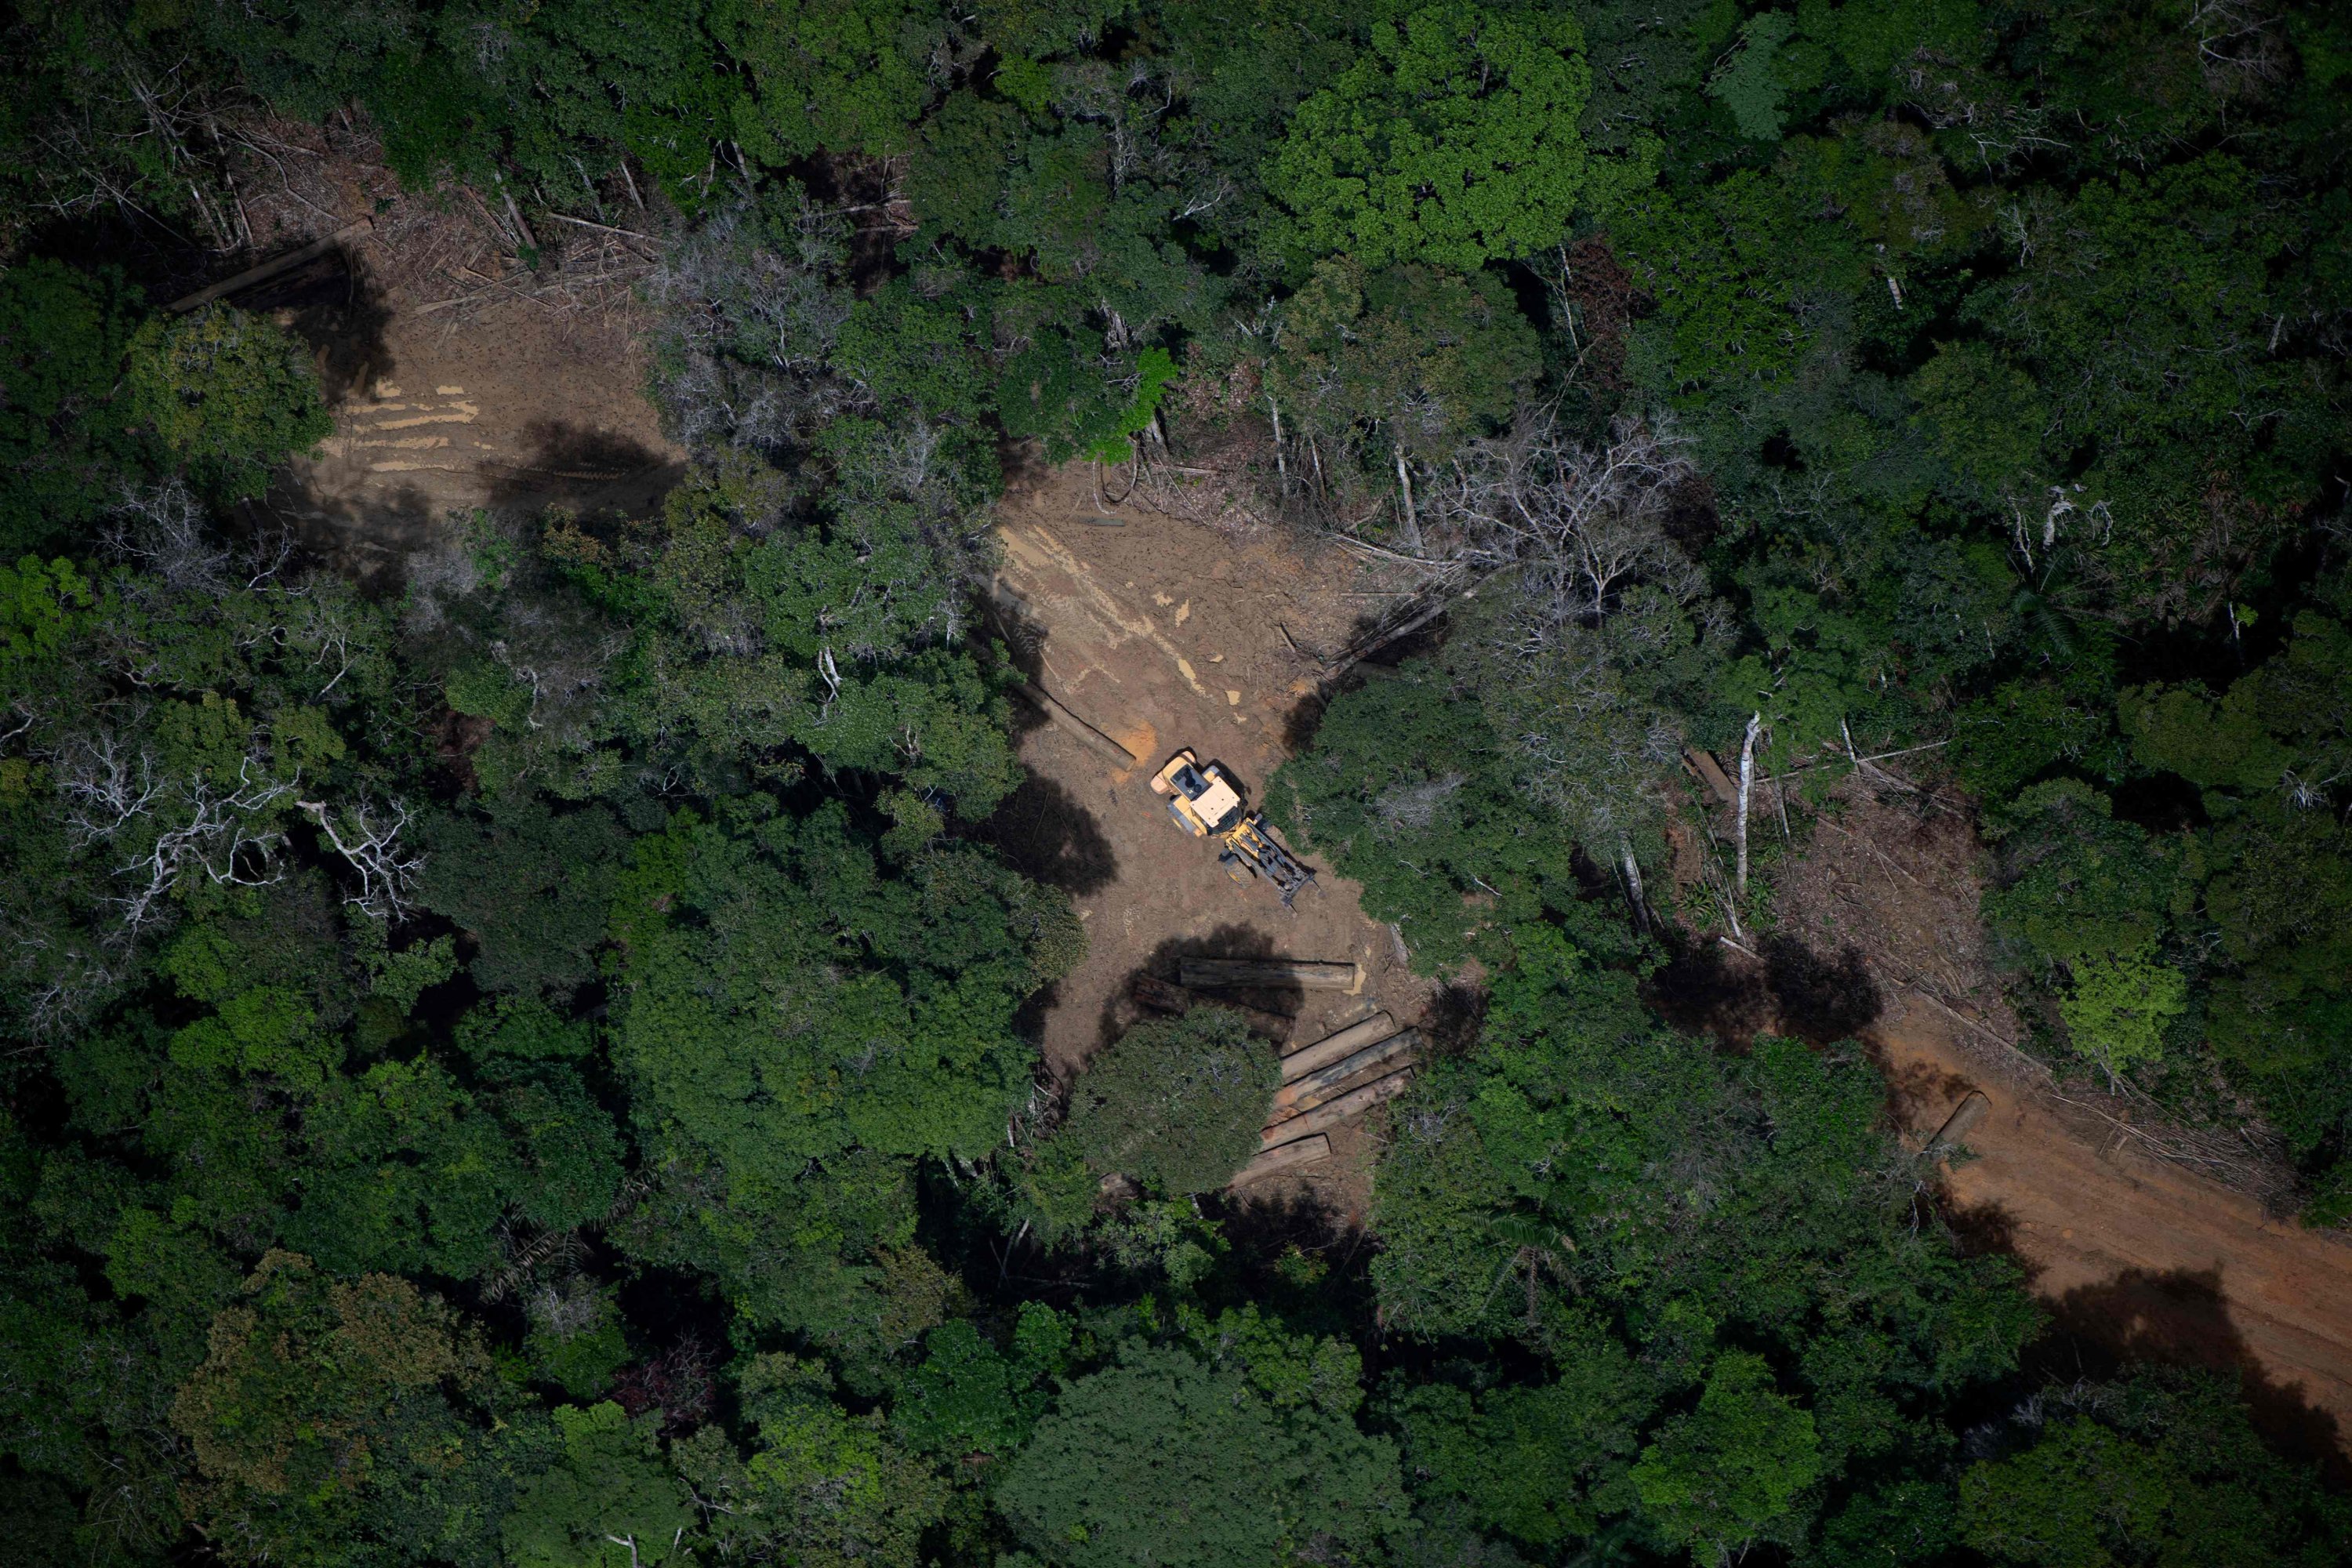 An aerial view showing a bulldozer removing wood from a deforested area in the Amazon rainforest is seen during a flight between Manaus and Manicore, in Amazonas State, Brazil, June 6, 2022. (AFP Photo)